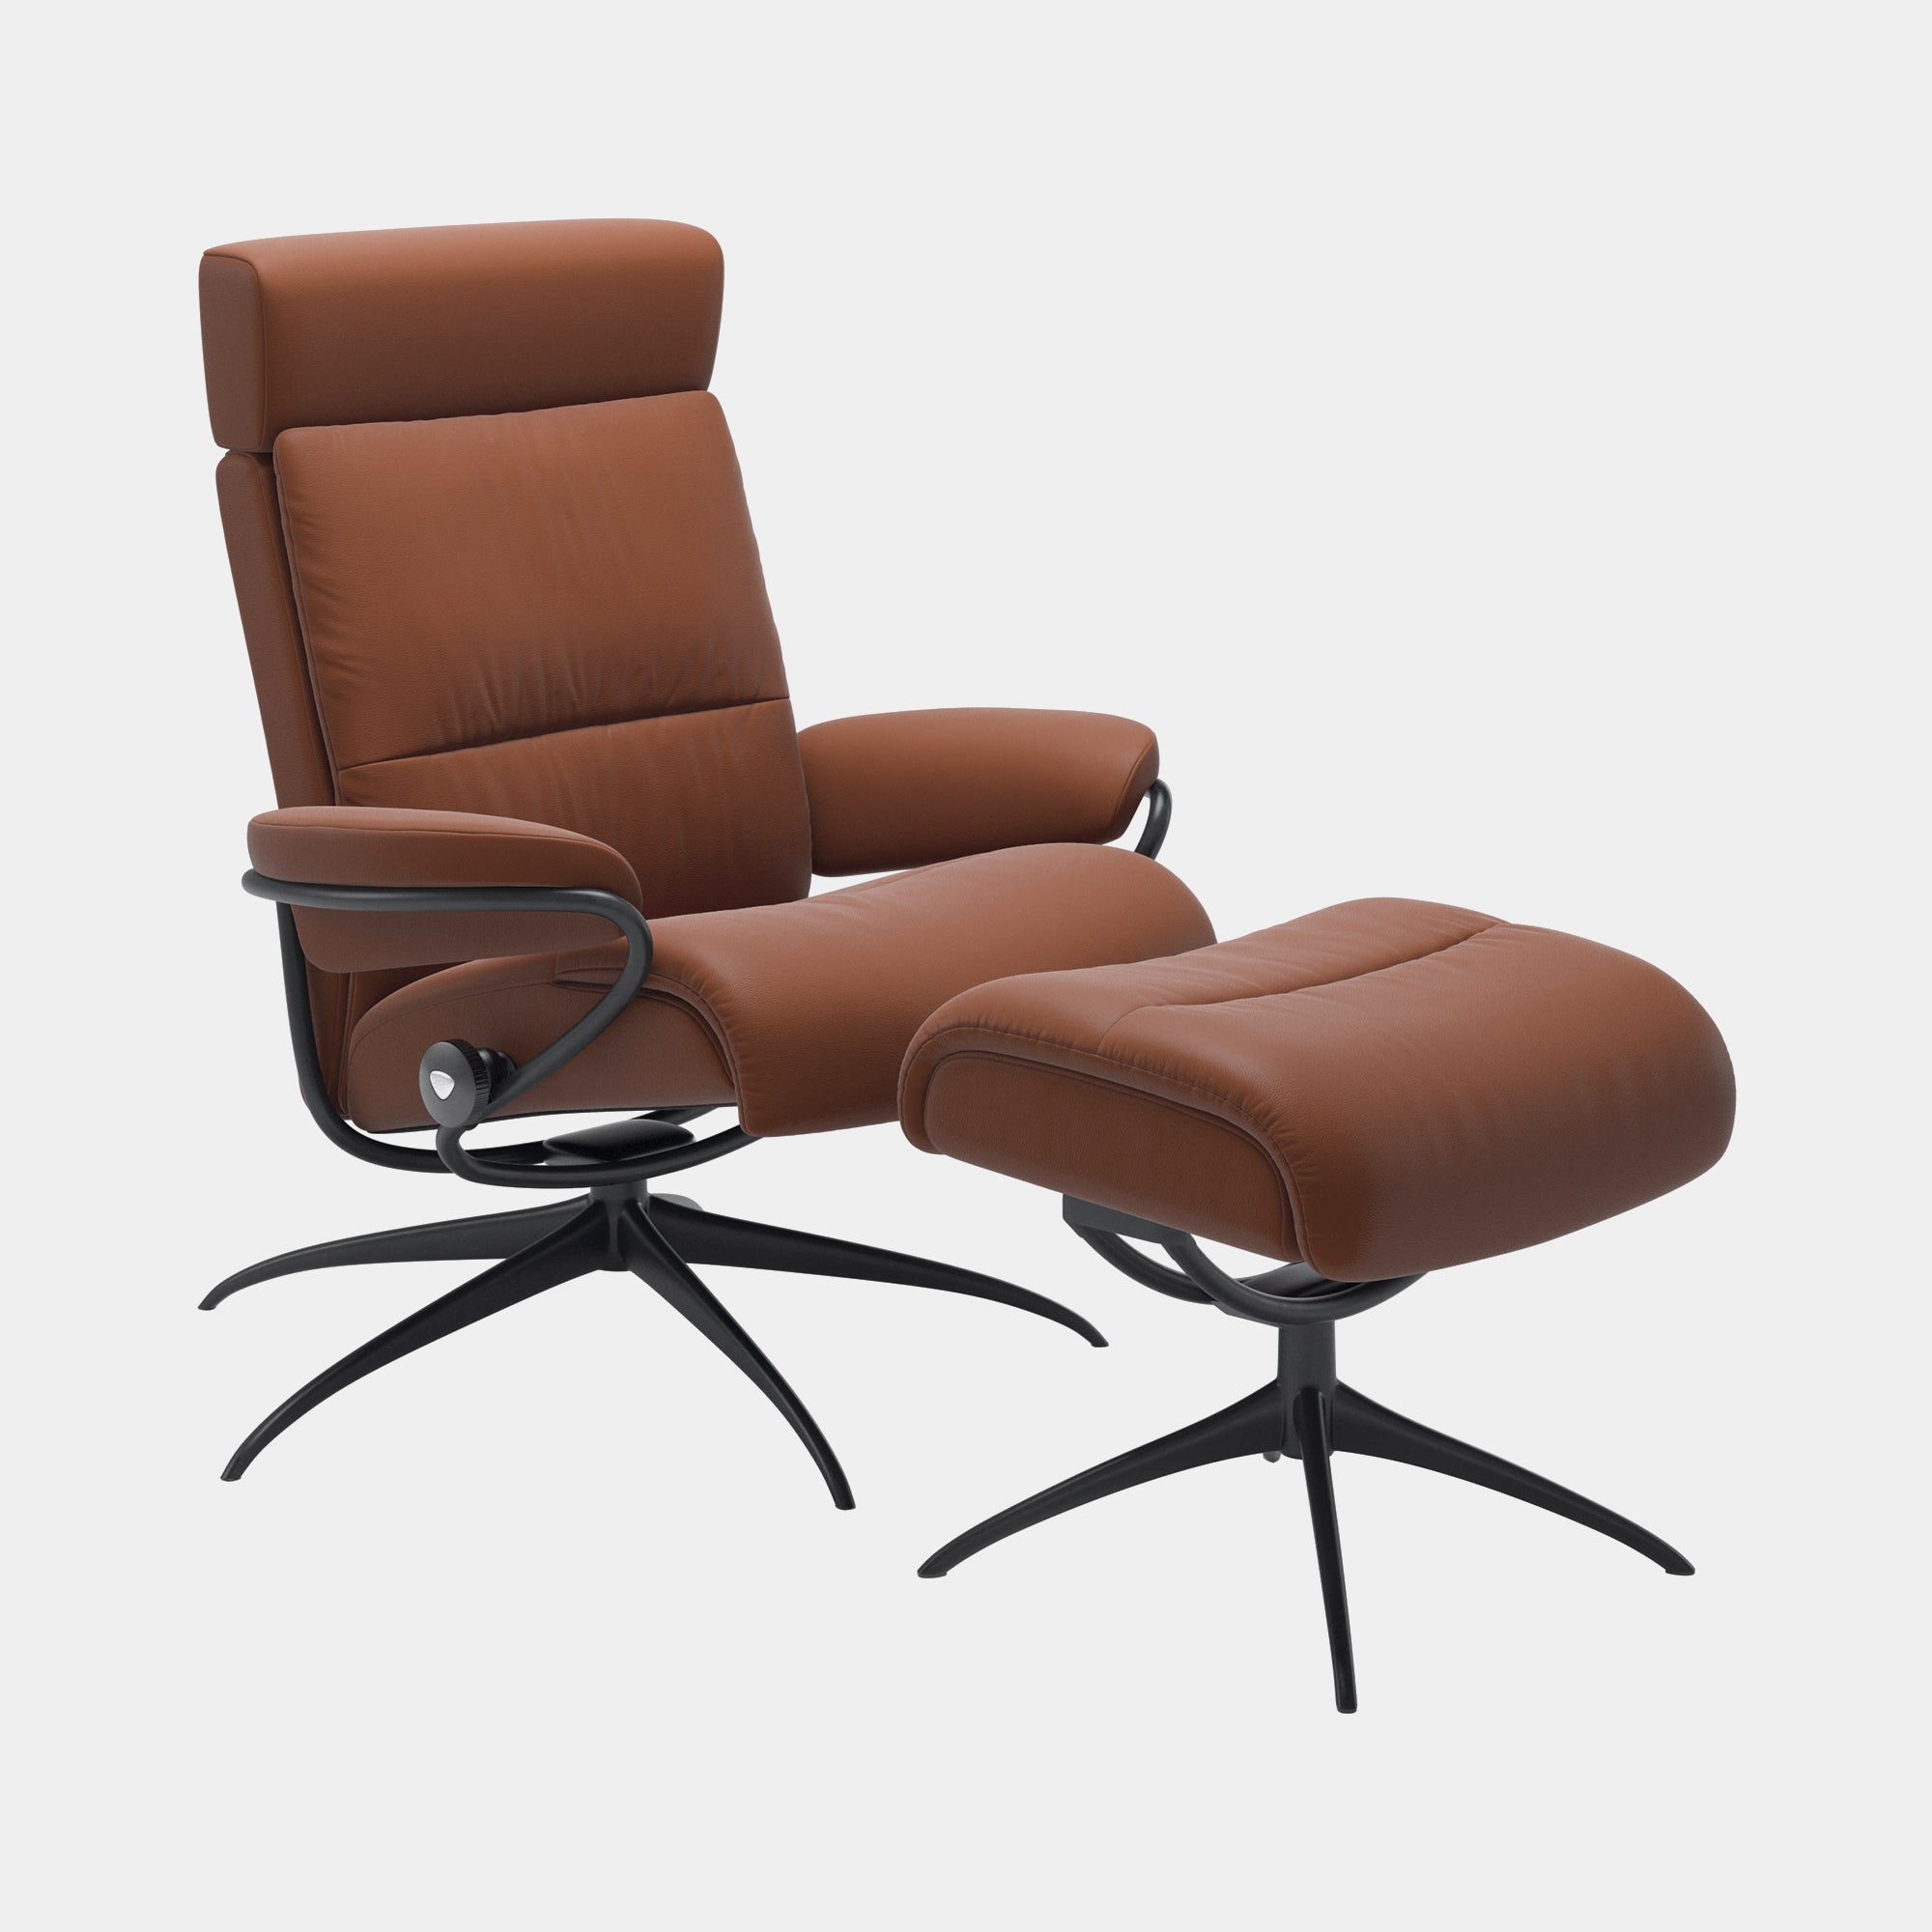 QUICKSHIP - Chair With Footstool With Headrest With Matt Black Star Base In Leather Paloma Copper